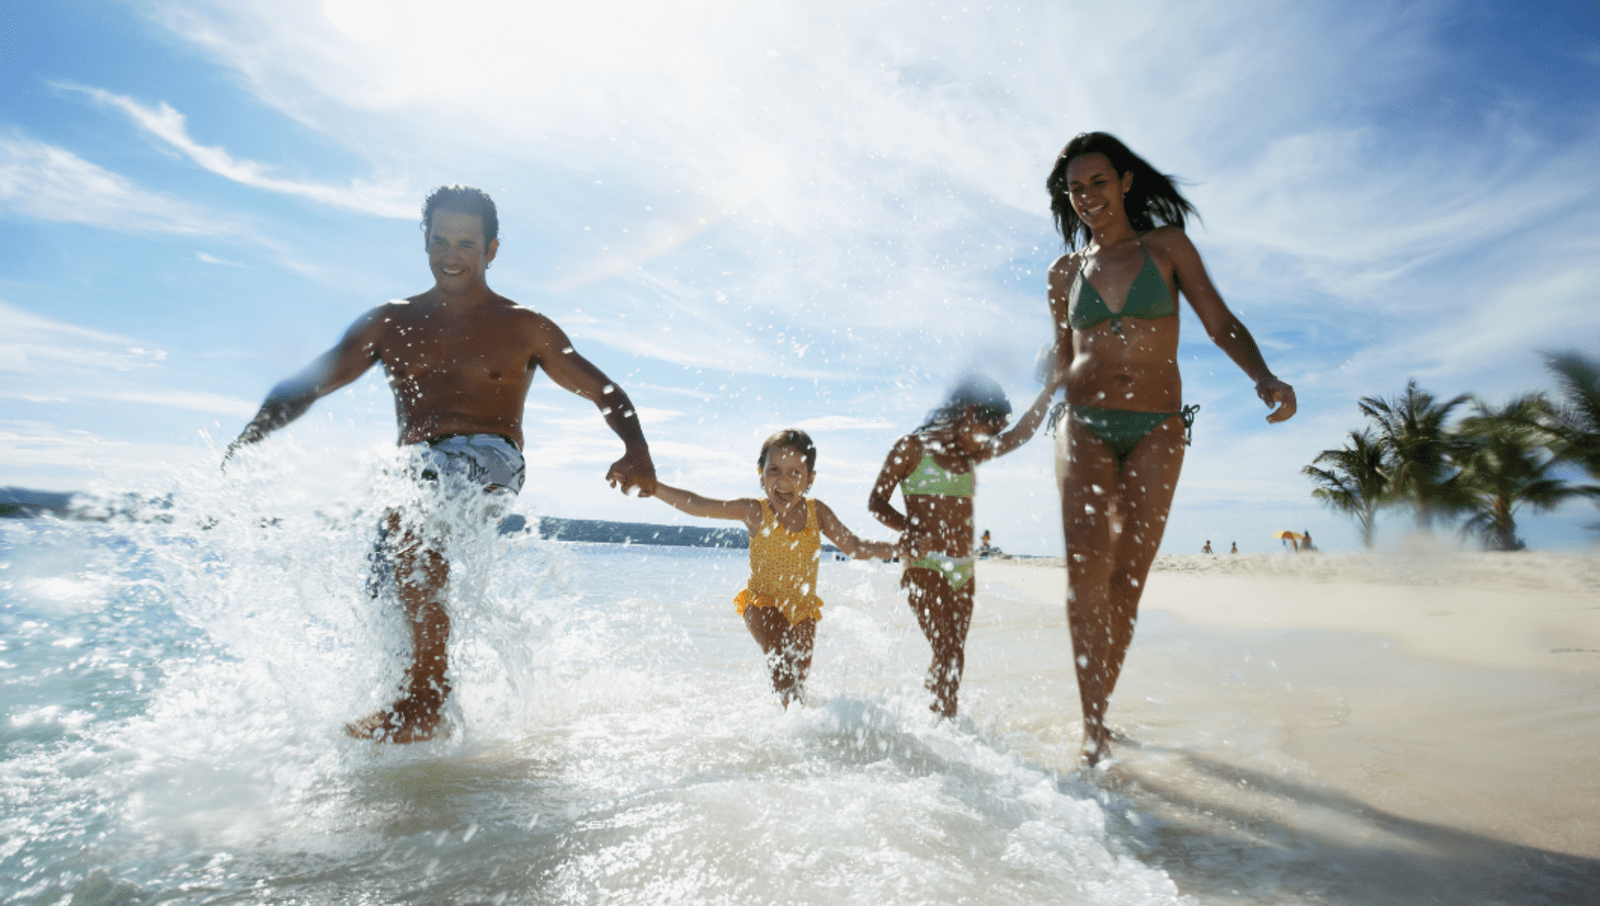 Two adults and two children having fun in the water at the beach